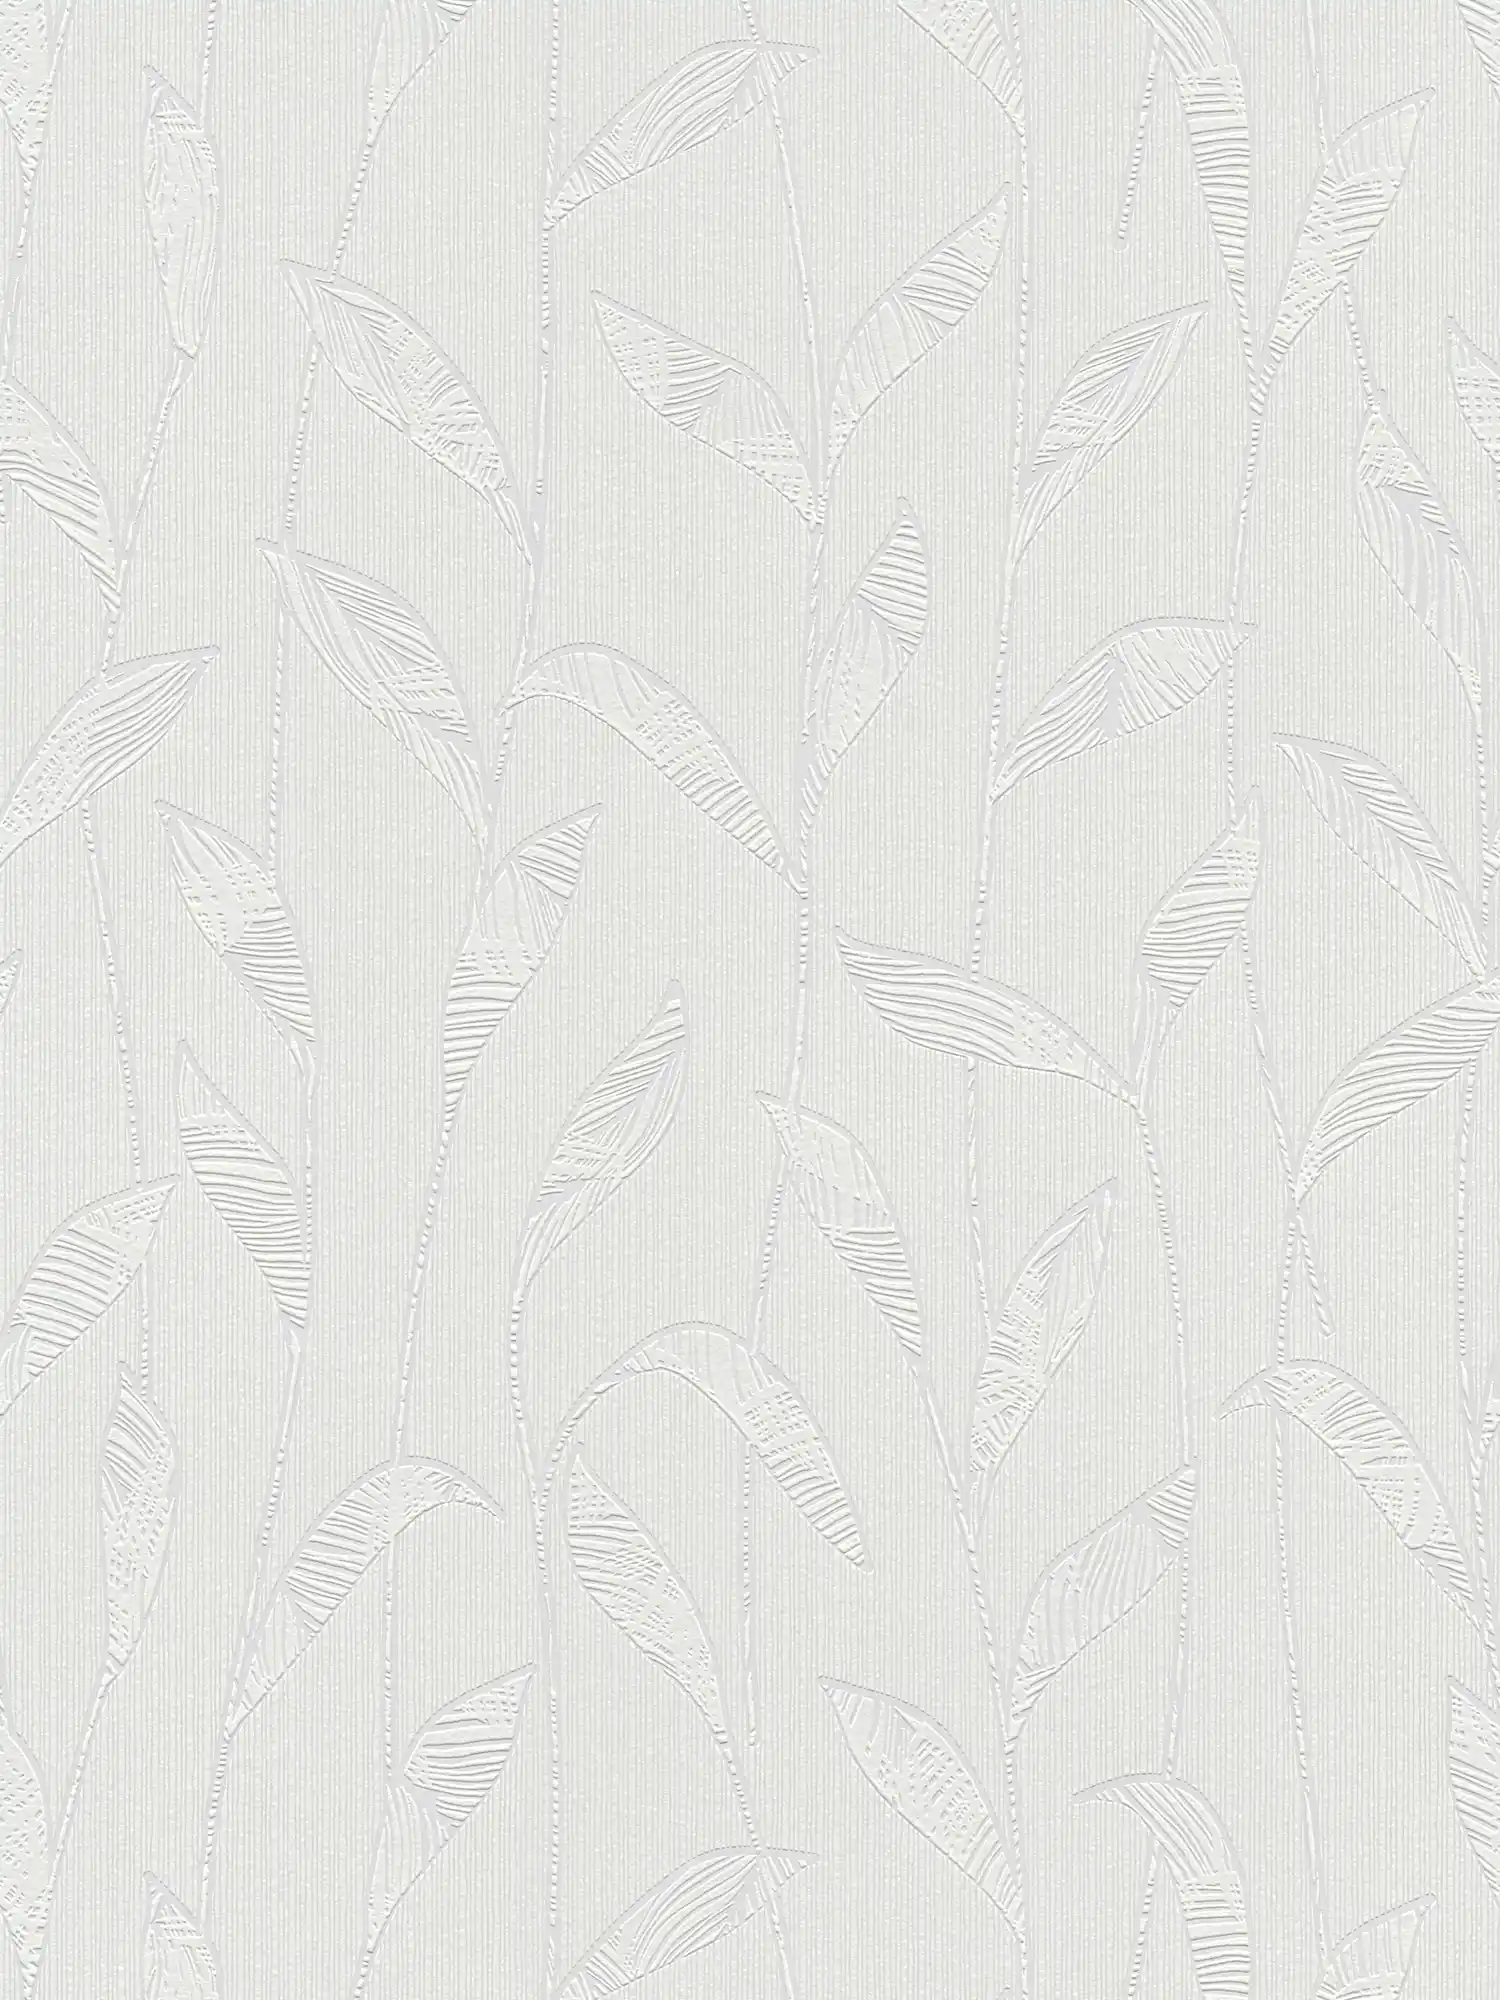 Non-woven wallpaper with leaf design to paint over - Paintable
